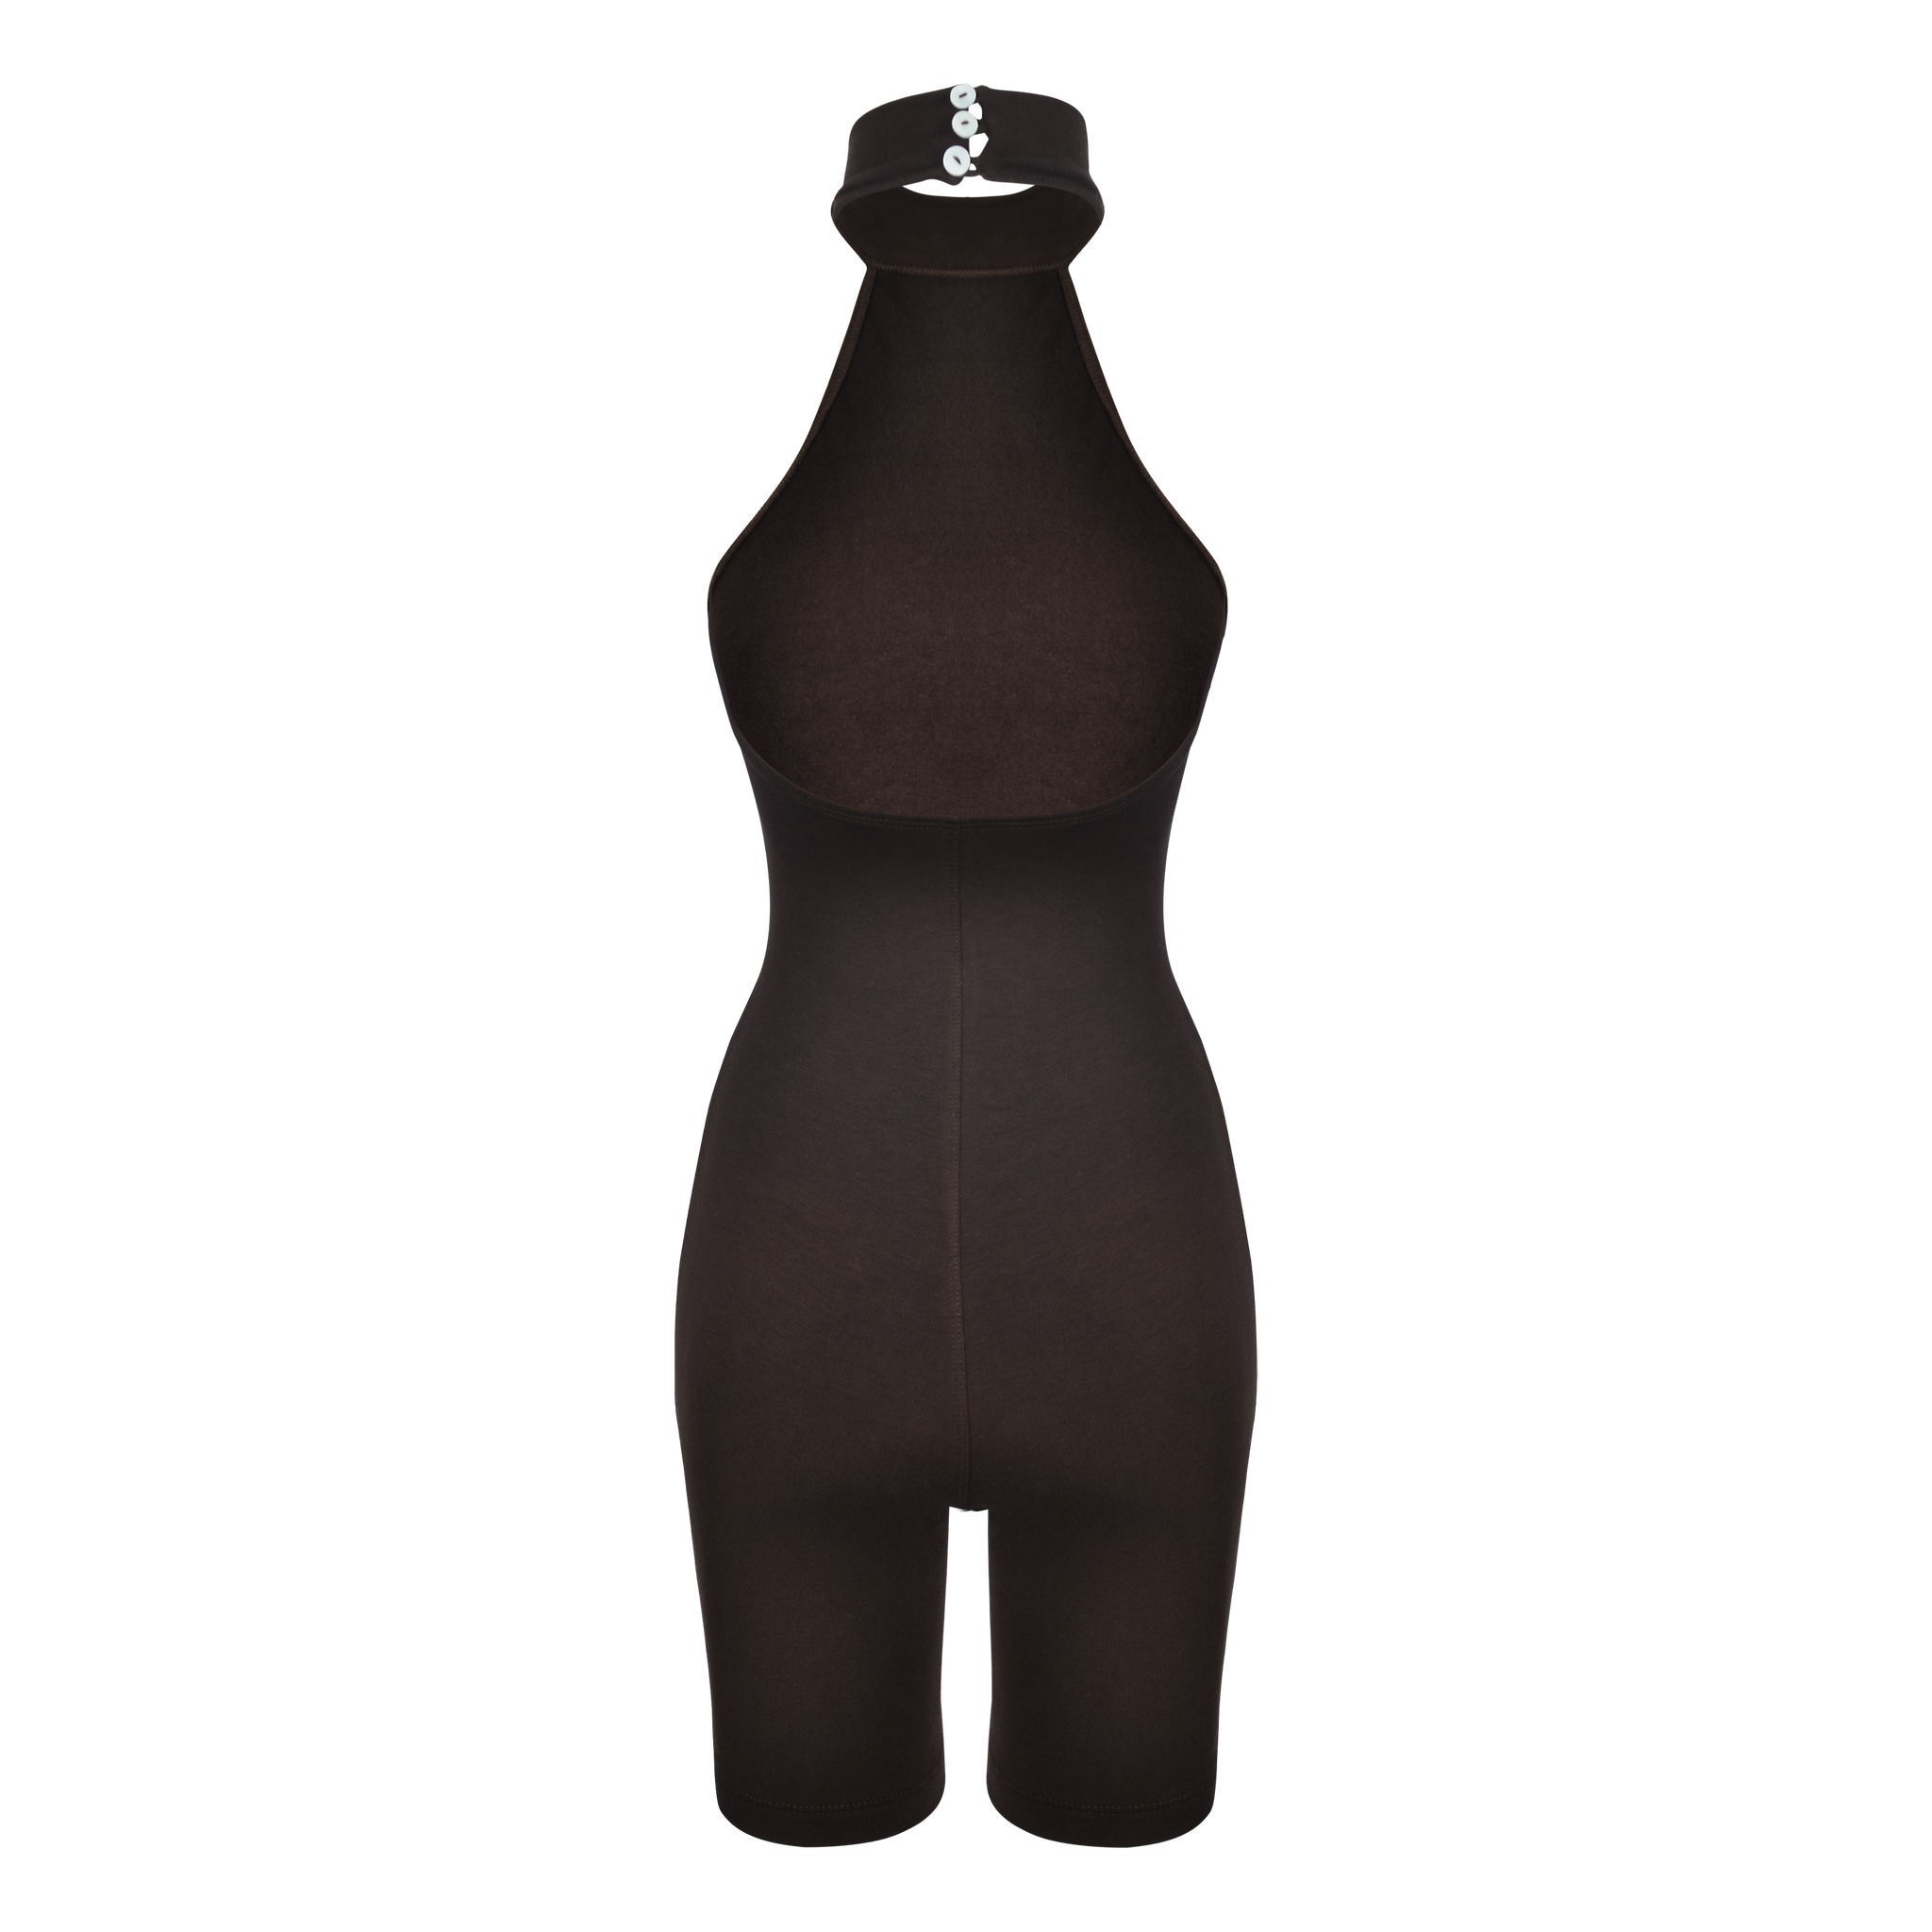 Palo Jumpsuit Choco - APPAREL THIS IS A LOVE SONG